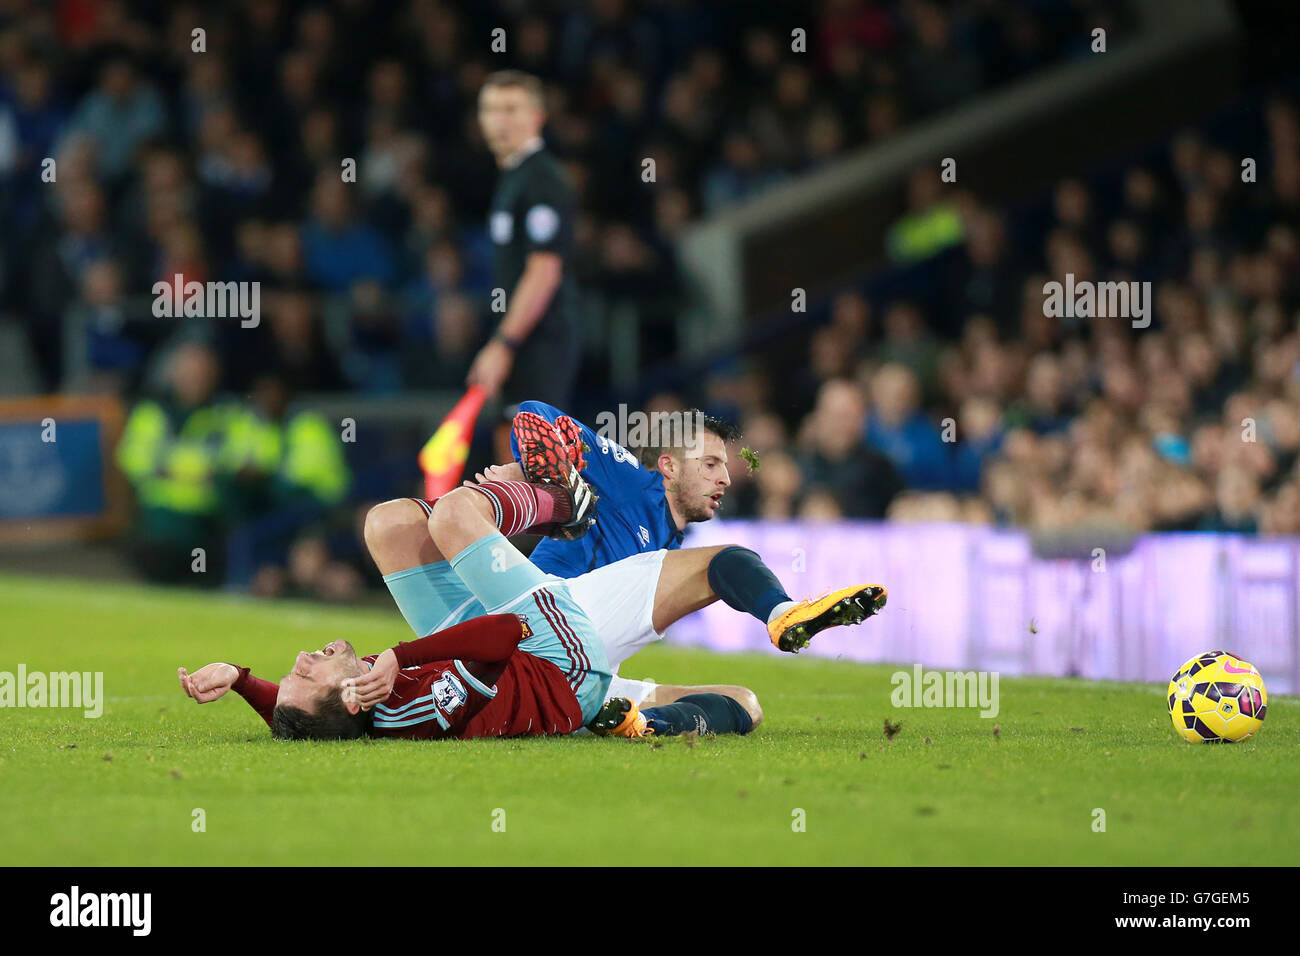 West Ham United's Morgan Amalfitano (left) is brought down by Everton's Kevin Mirallas during the Barclays Premier League match at Goodison Park, Liverpool. Stock Photo